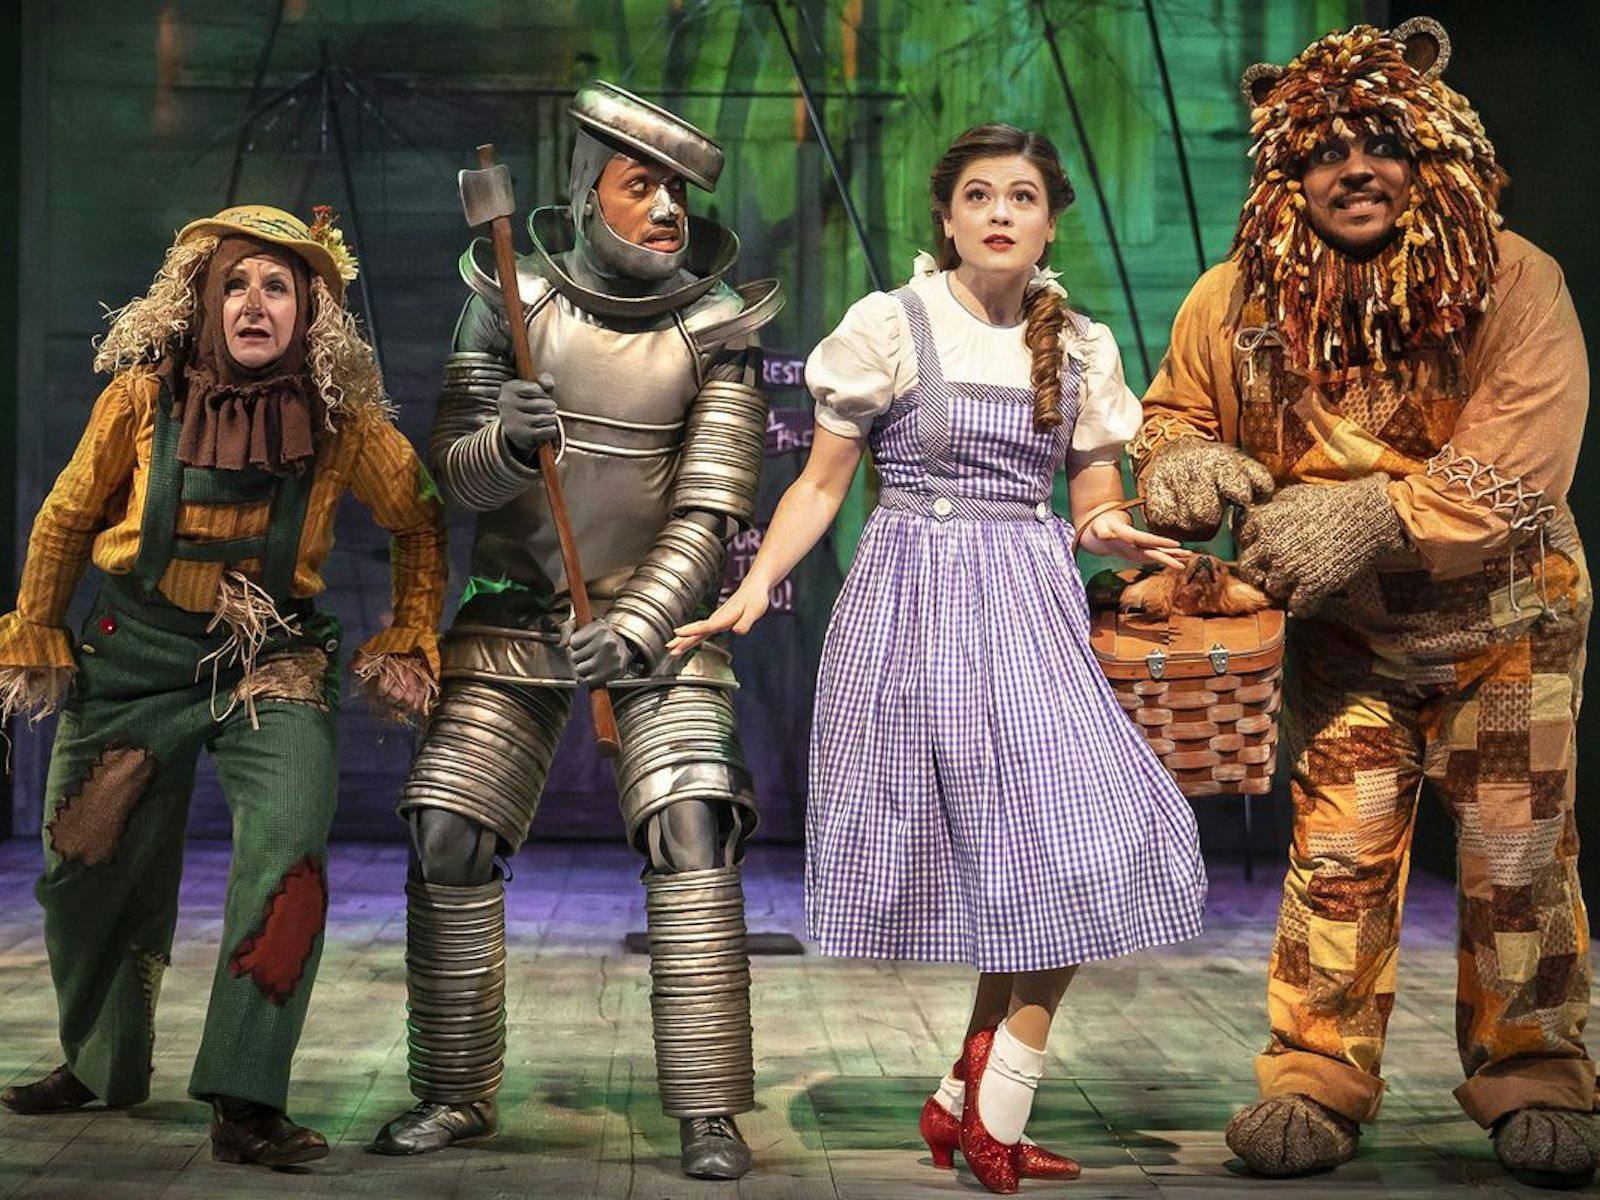 oz wizard chicago theater musical dorothy scarecrow theatre aug shakespeare tin chicagoland lion tickets